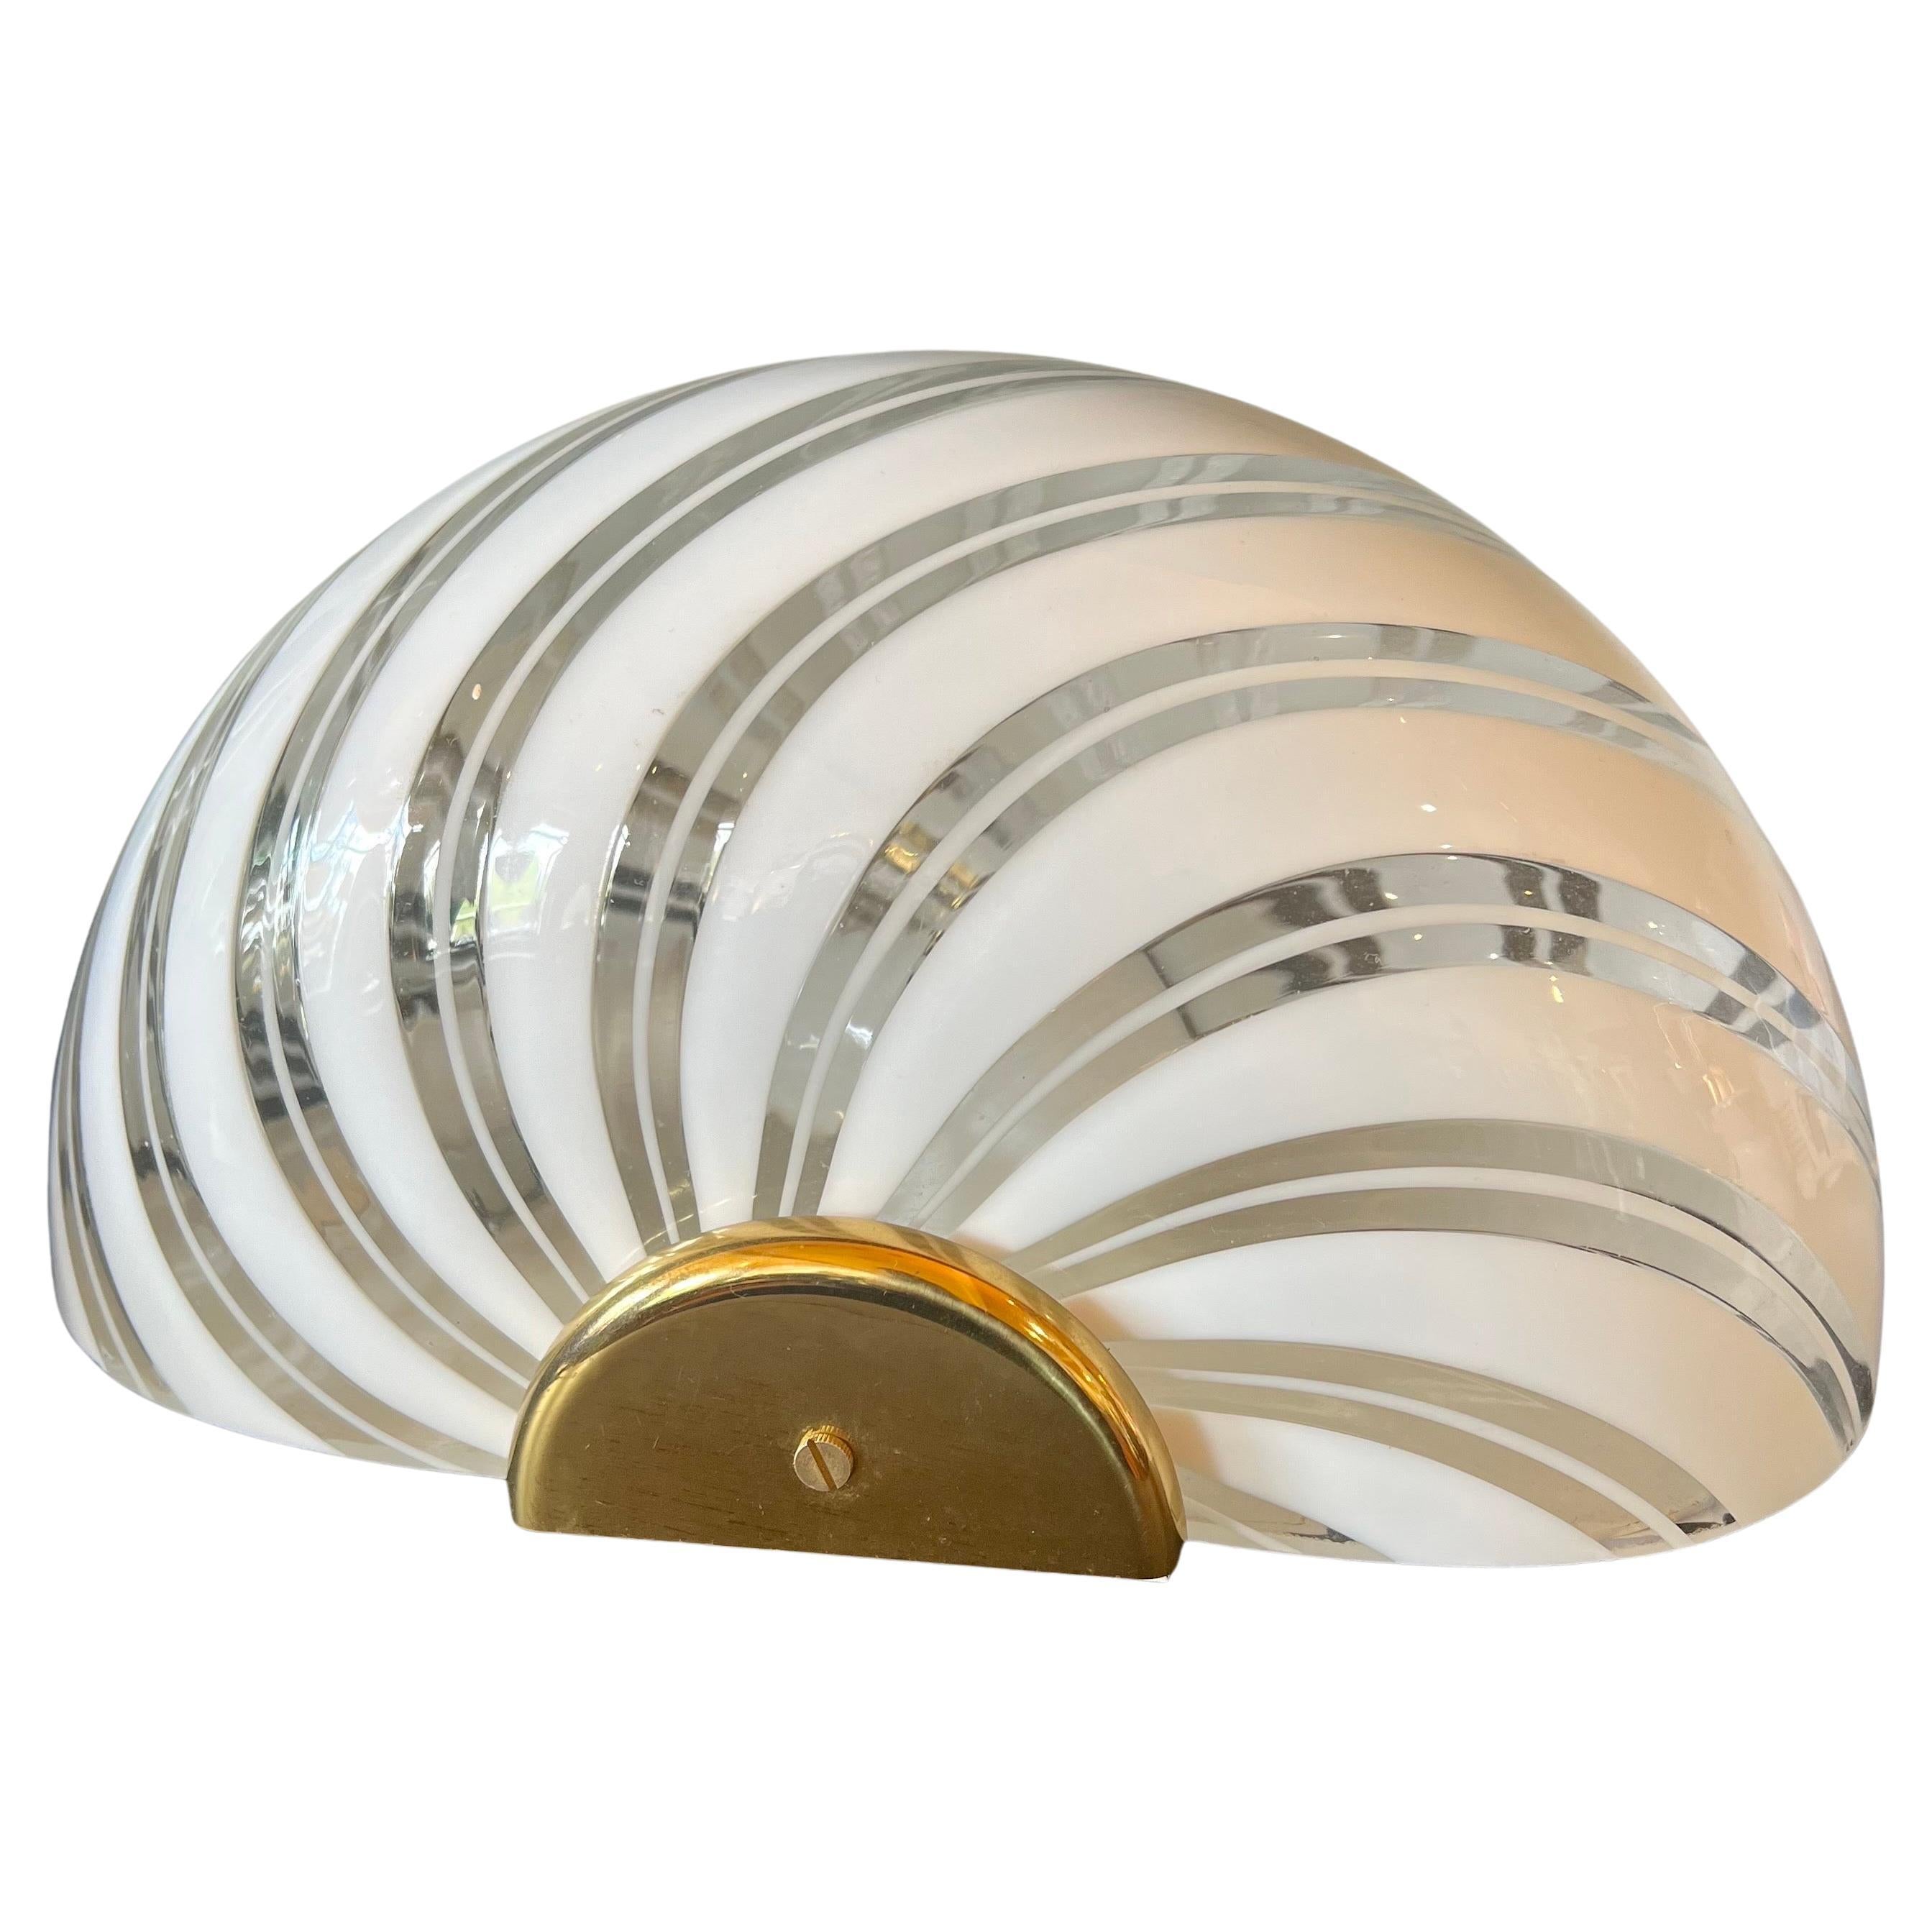 Post-Modern Italian Murano Glass & Brass Spiral Shell Wall / Table Sconce Lamp For Sale